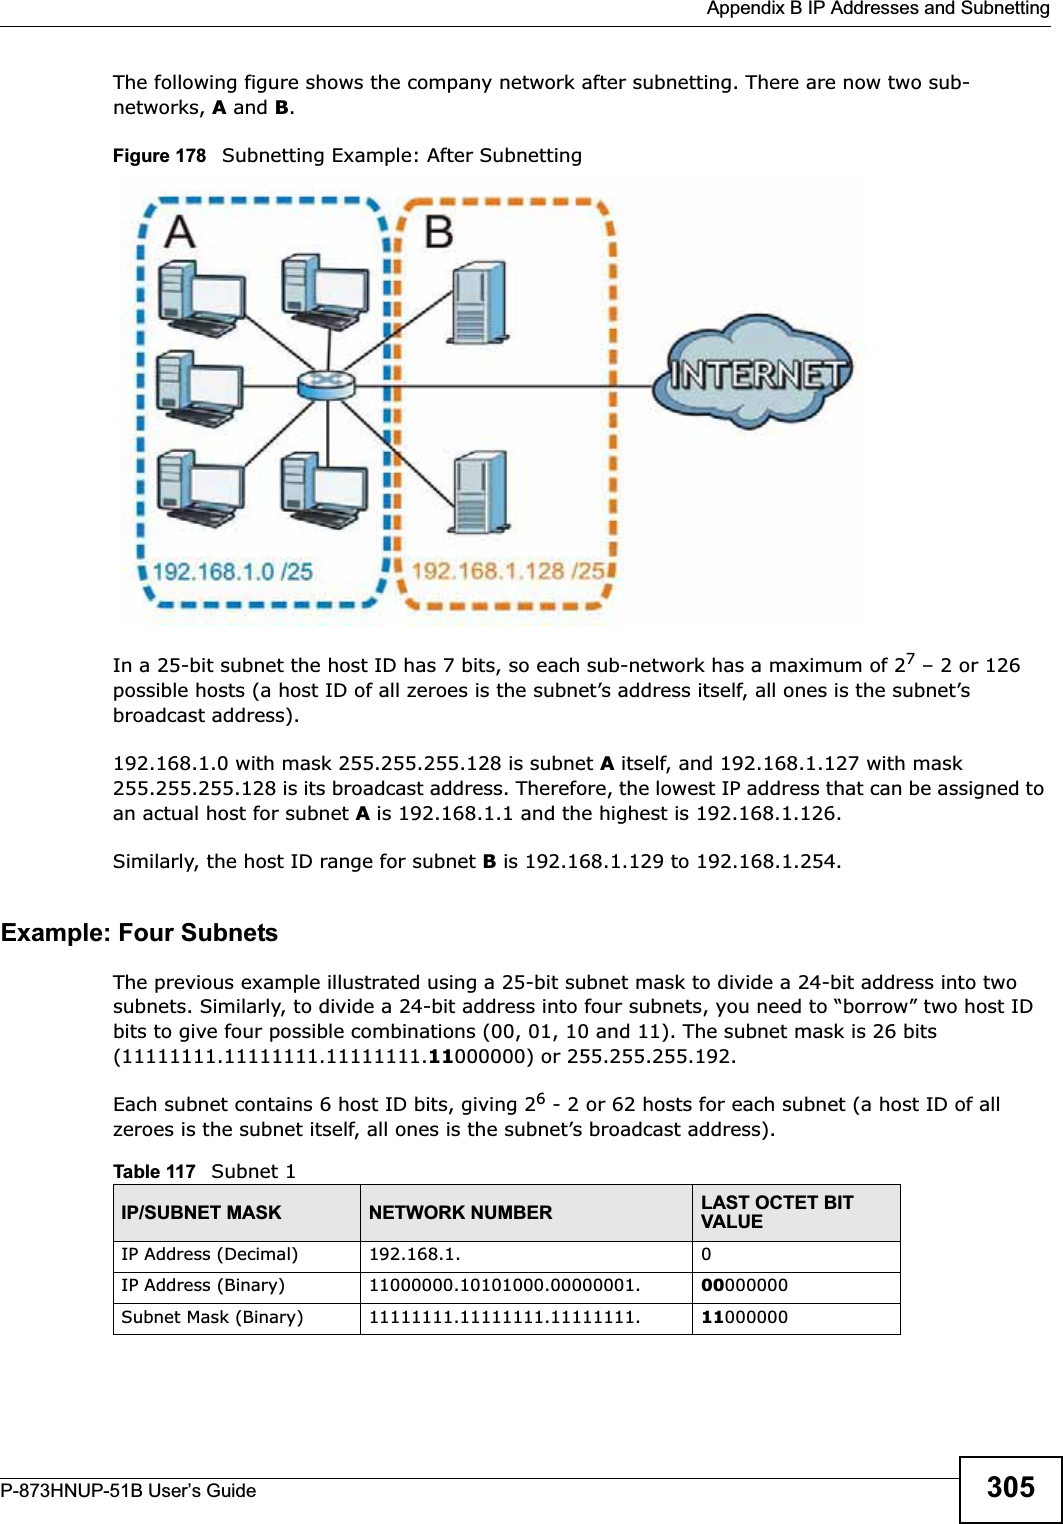  Appendix B IP Addresses and SubnettingP-873HNUP-51B User’s Guide 305The following figure shows the company network after subnetting. There are now two sub-networks, A and B.Figure 178   Subnetting Example: After SubnettingIn a 25-bit subnet the host ID has 7 bits, so each sub-network has a maximum of 27 – 2 or 126 possible hosts (a host ID of all zeroes is the subnet’s address itself, all ones is the subnet’s broadcast address).192.168.1.0 with mask 255.255.255.128 is subnet A itself, and 192.168.1.127 with mask 255.255.255.128 is its broadcast address. Therefore, the lowest IP address that can be assigned to an actual host for subnet A is 192.168.1.1 and the highest is 192.168.1.126. Similarly, the host ID range for subnet B is 192.168.1.129 to 192.168.1.254.Example: Four Subnets The previous example illustrated using a 25-bit subnet mask to divide a 24-bit address into two subnets. Similarly, to divide a 24-bit address into four subnets, you need to “borrow” two host ID bits to give four possible combinations (00, 01, 10 and 11). The subnet mask is 26 bits (11111111.11111111.11111111.11000000) or 255.255.255.192. Each subnet contains 6 host ID bits, giving 26 - 2 or 62 hosts for each subnet (a host ID of all zeroes is the subnet itself, all ones is the subnet’s broadcast address). Table 117   Subnet 1IP/SUBNET MASK NETWORK NUMBER LAST OCTET BIT VALUEIP Address (Decimal) 192.168.1. 0IP Address (Binary) 11000000.10101000.00000001. 00000000Subnet Mask (Binary) 11111111.11111111.11111111. 11000000